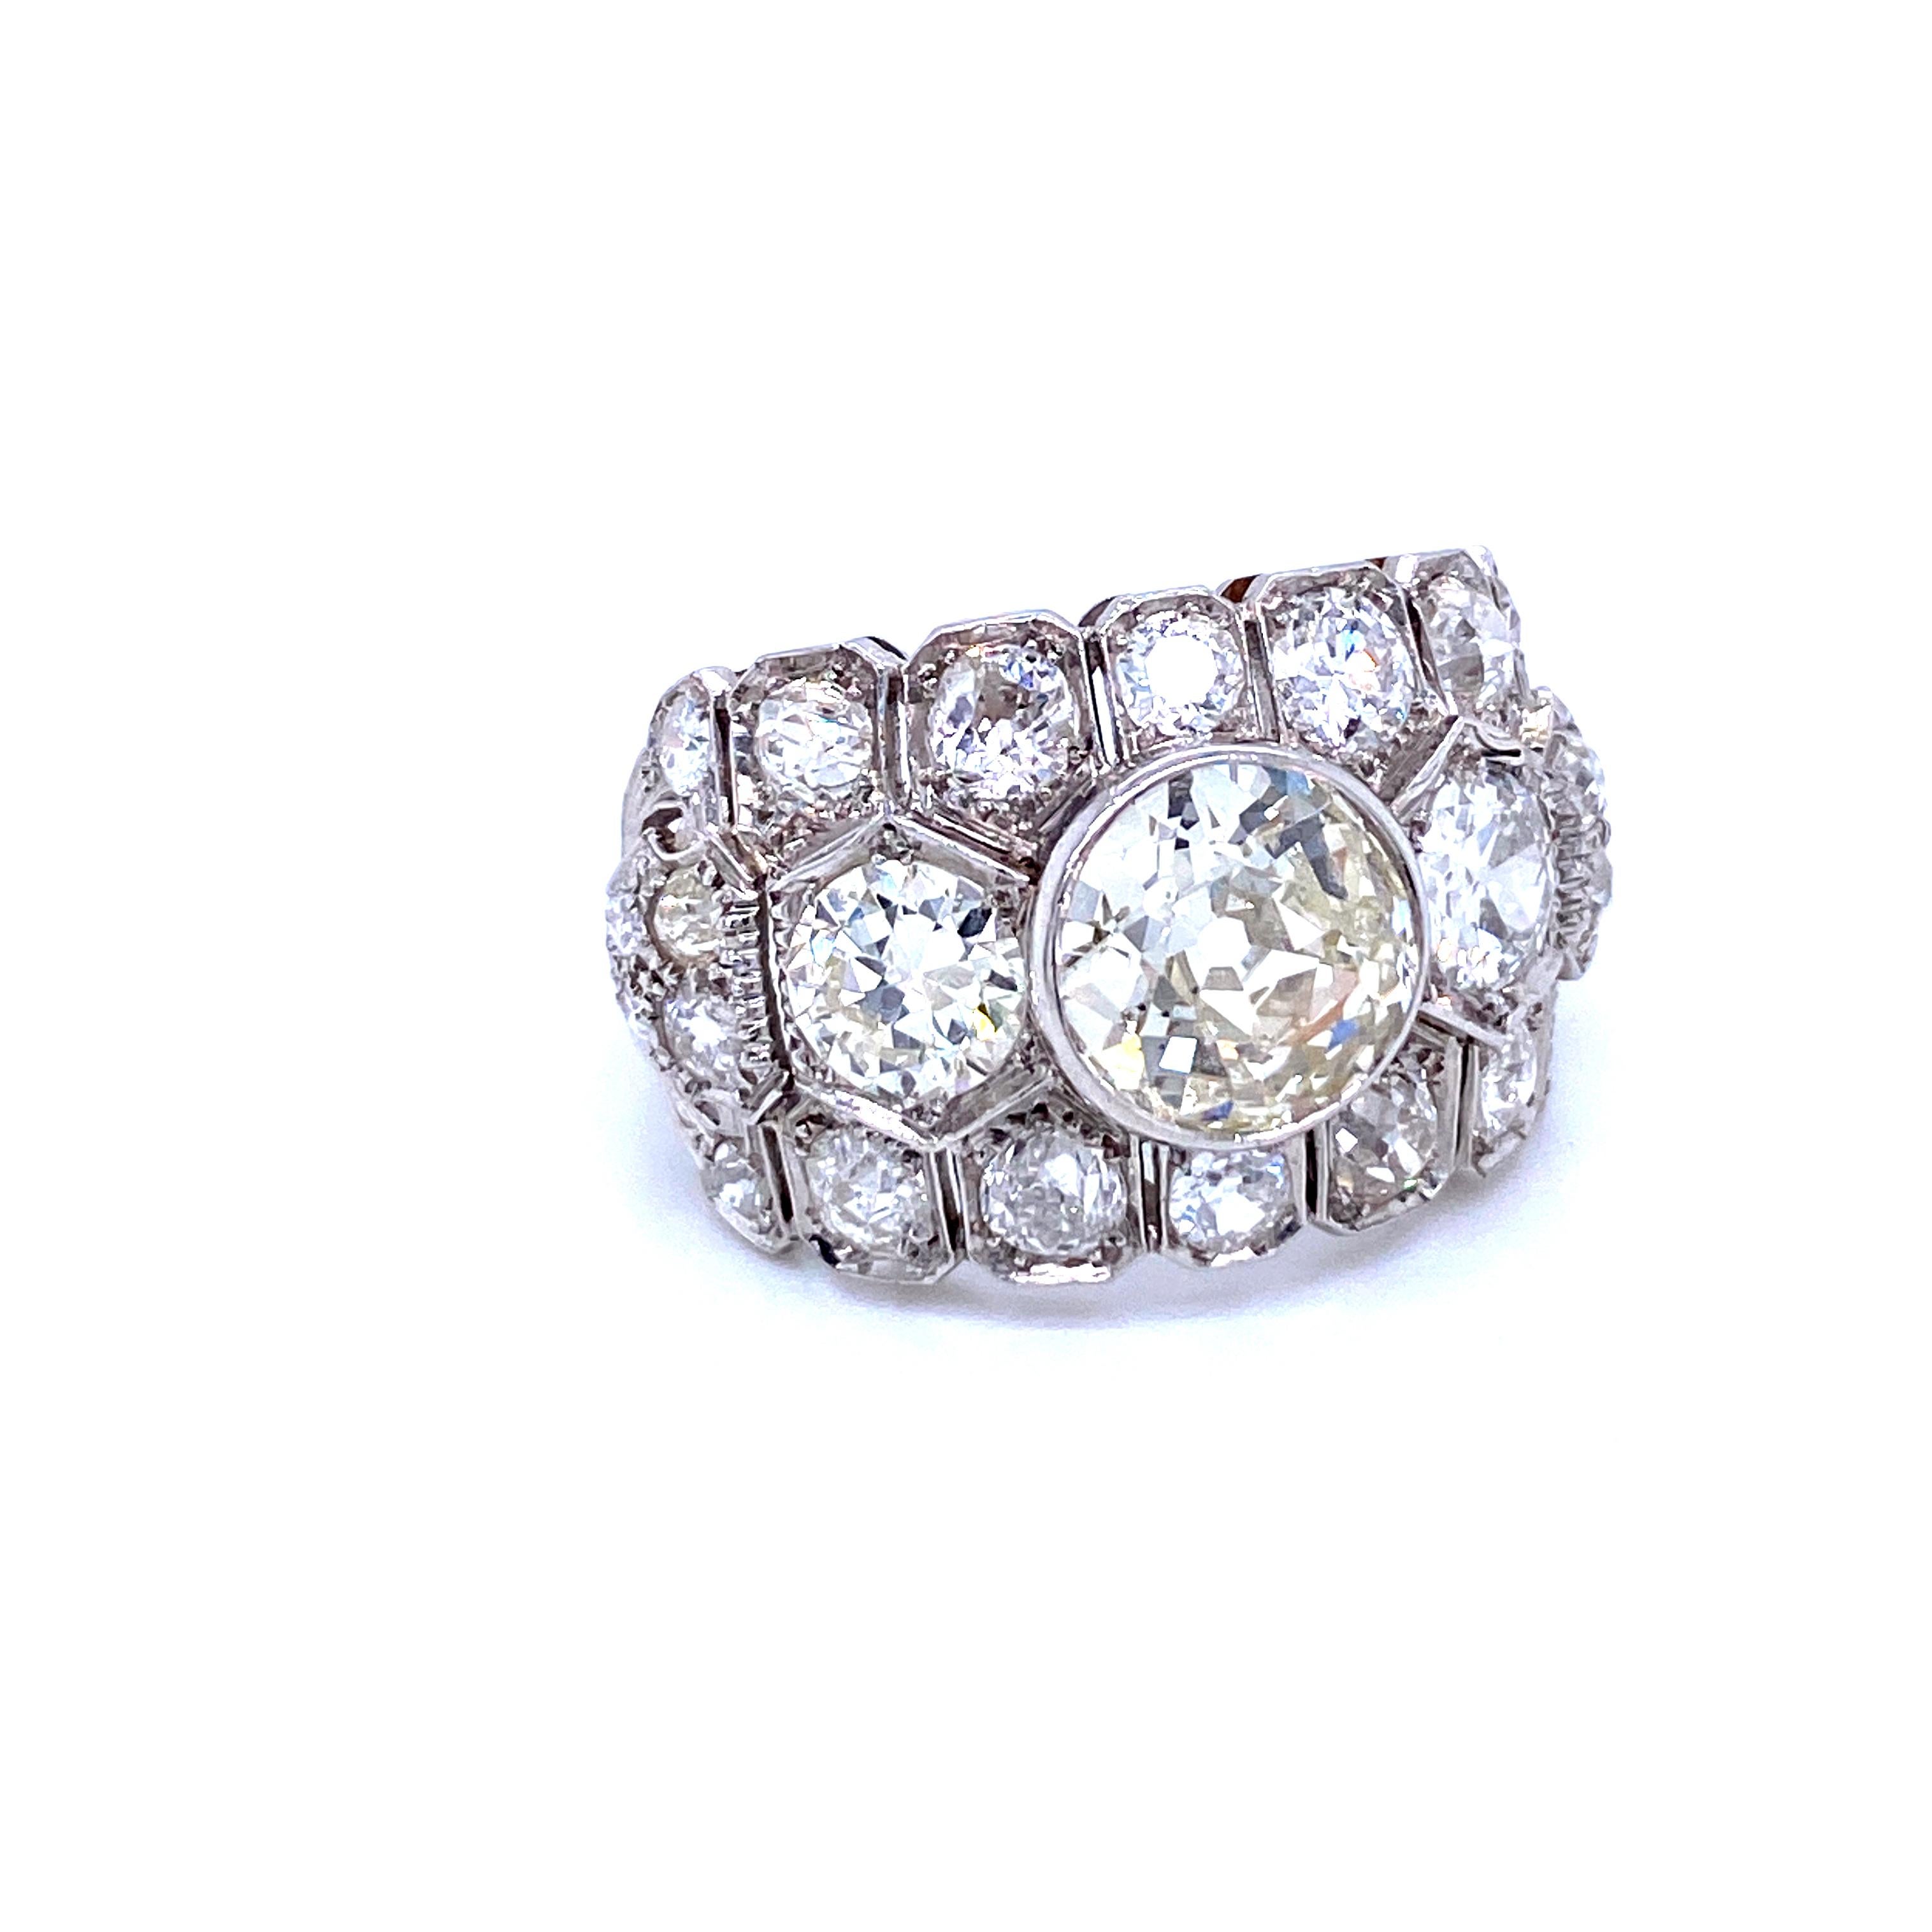 An exquisite example of Art Deco jewel, this ring is hand-crafted in 18k white gold, authentic from 1920/1930, featuring in the center a Large sparkling Old mine-cut Diamond weighing 2.50 carats, graded K color SI2, on the two sides two large